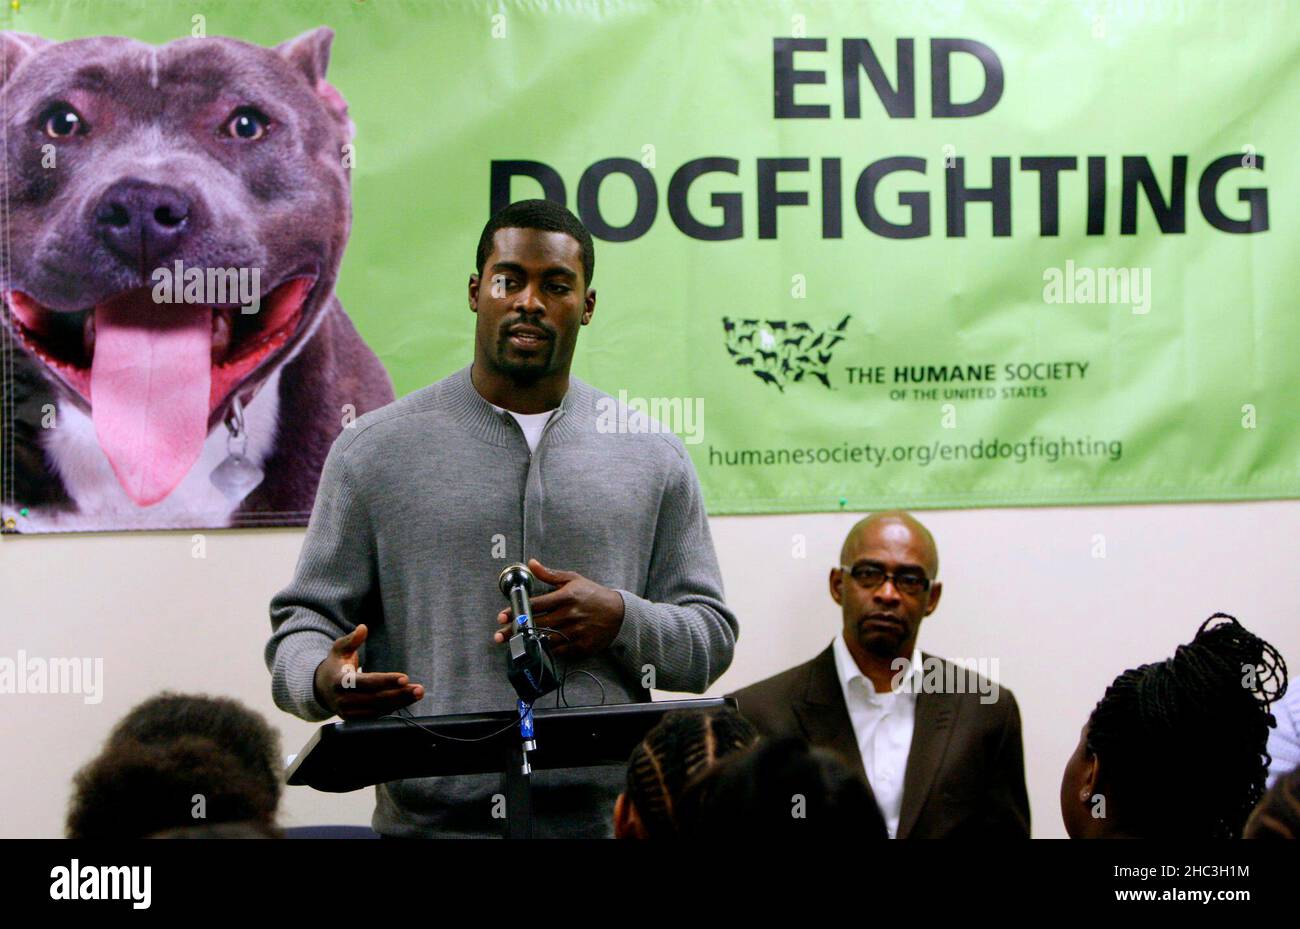 Durham, USA. 26th Feb, 2010. Philadelphia Eagles quarterback Michael Vick makes a stop in Durham, North Carolina, Friday, Feb. 26, 2010, to speak to students and local residents at the New Horizons alternative school about his mistakes being involved in dog fighting and of second chances in life. He was introduced to the packed assembly room by Ralph Hawthorne, right, of the Humane Society of the United States. (Photo by Harry Lynch/The News & Observer/TNS/Sipa USA) Credit: Sipa USA/Alamy Live News Stock Photo